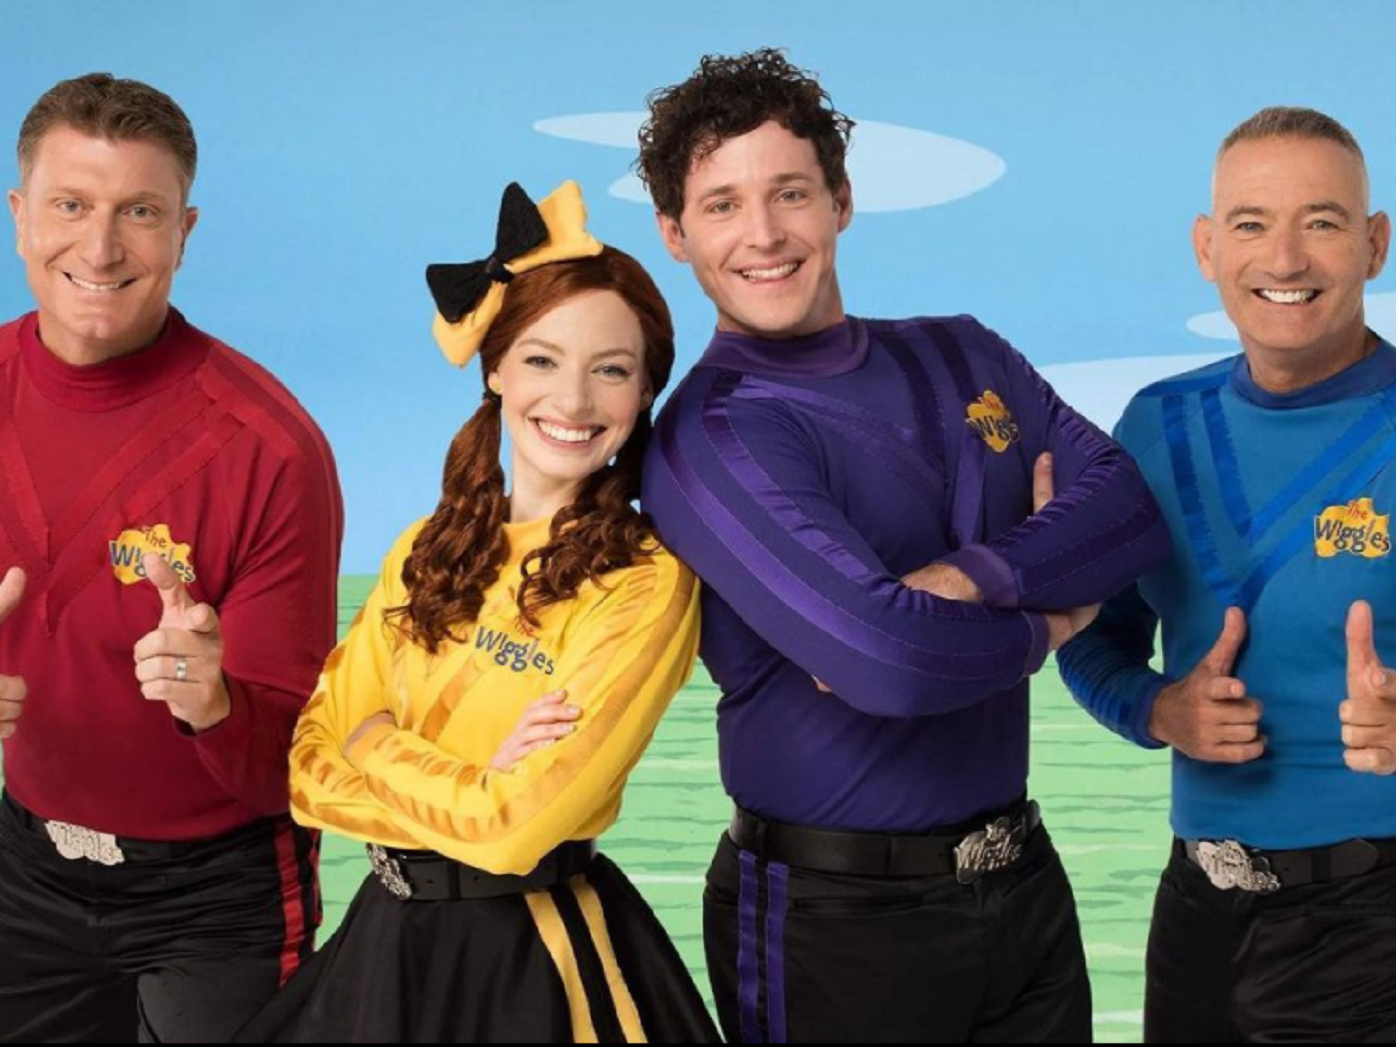 The Wiggles 30 years